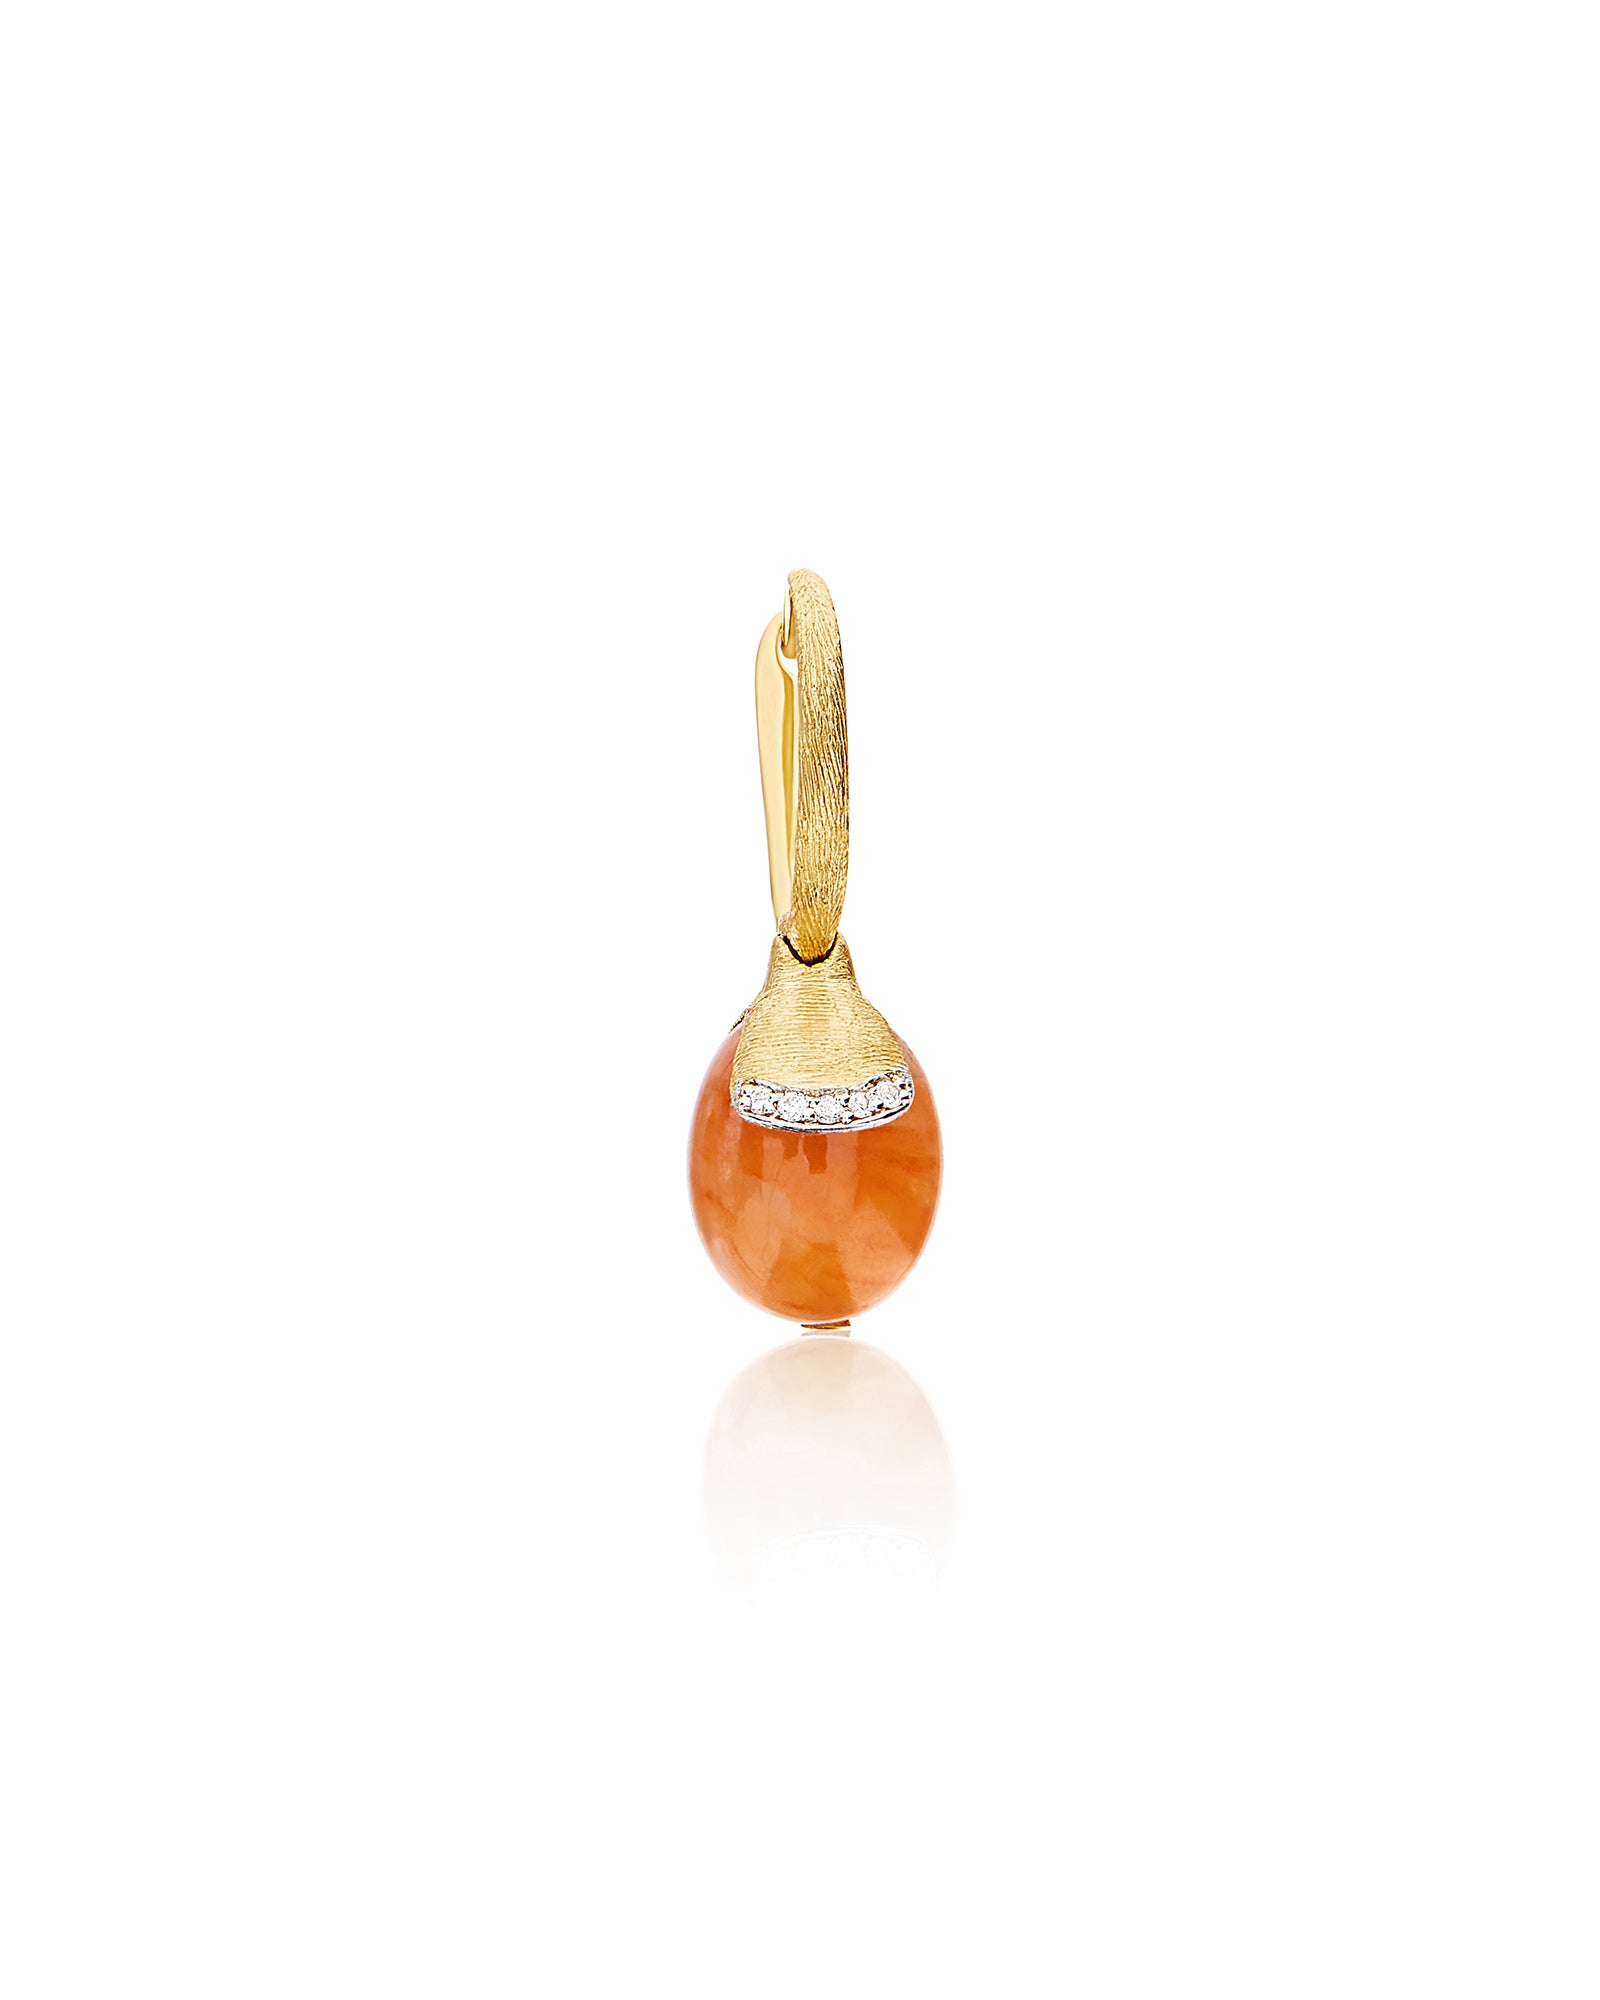 Nanis PETRA "AMULETS" CILIEGINE GOLD AND ORANGE AVENTURINE BALL DROP EARRINGS WITH DIAMONDS DETAILS (SMALL) OS11-603